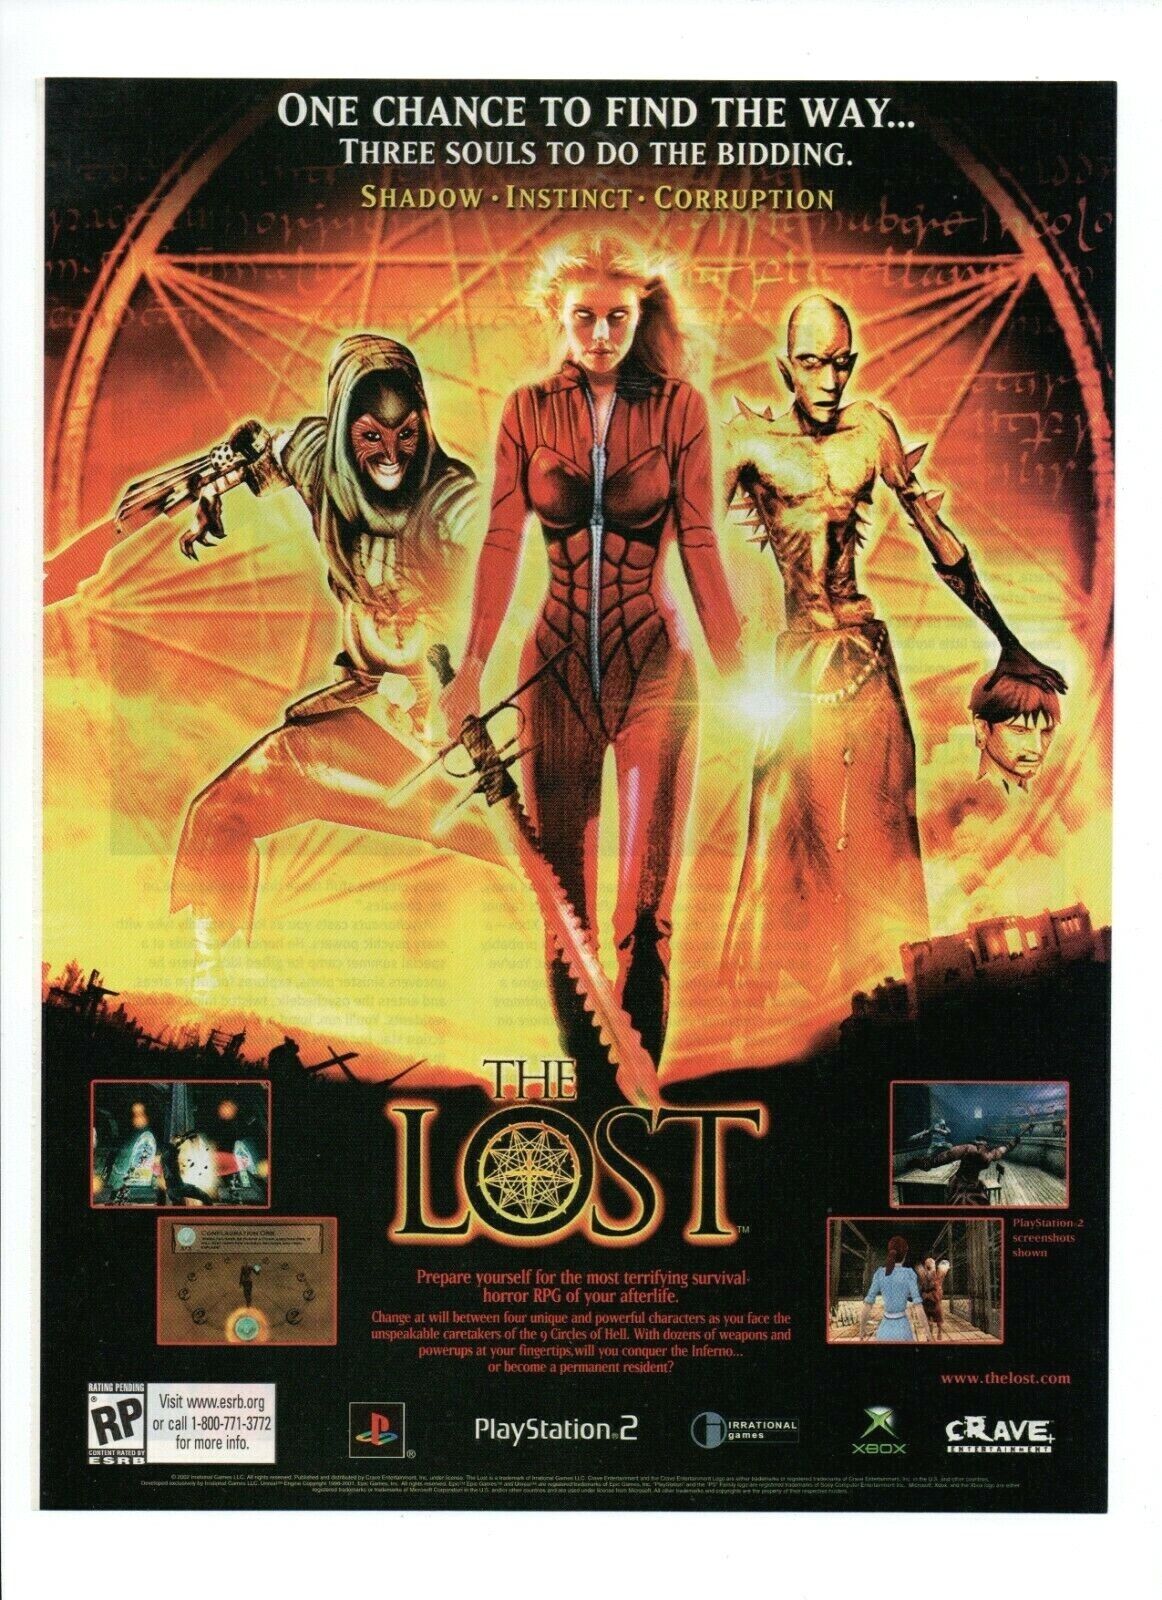 The Lost PS2 XBOX 2002 Game Print Ad - Three Souls To Do The Bidding Horror RPG